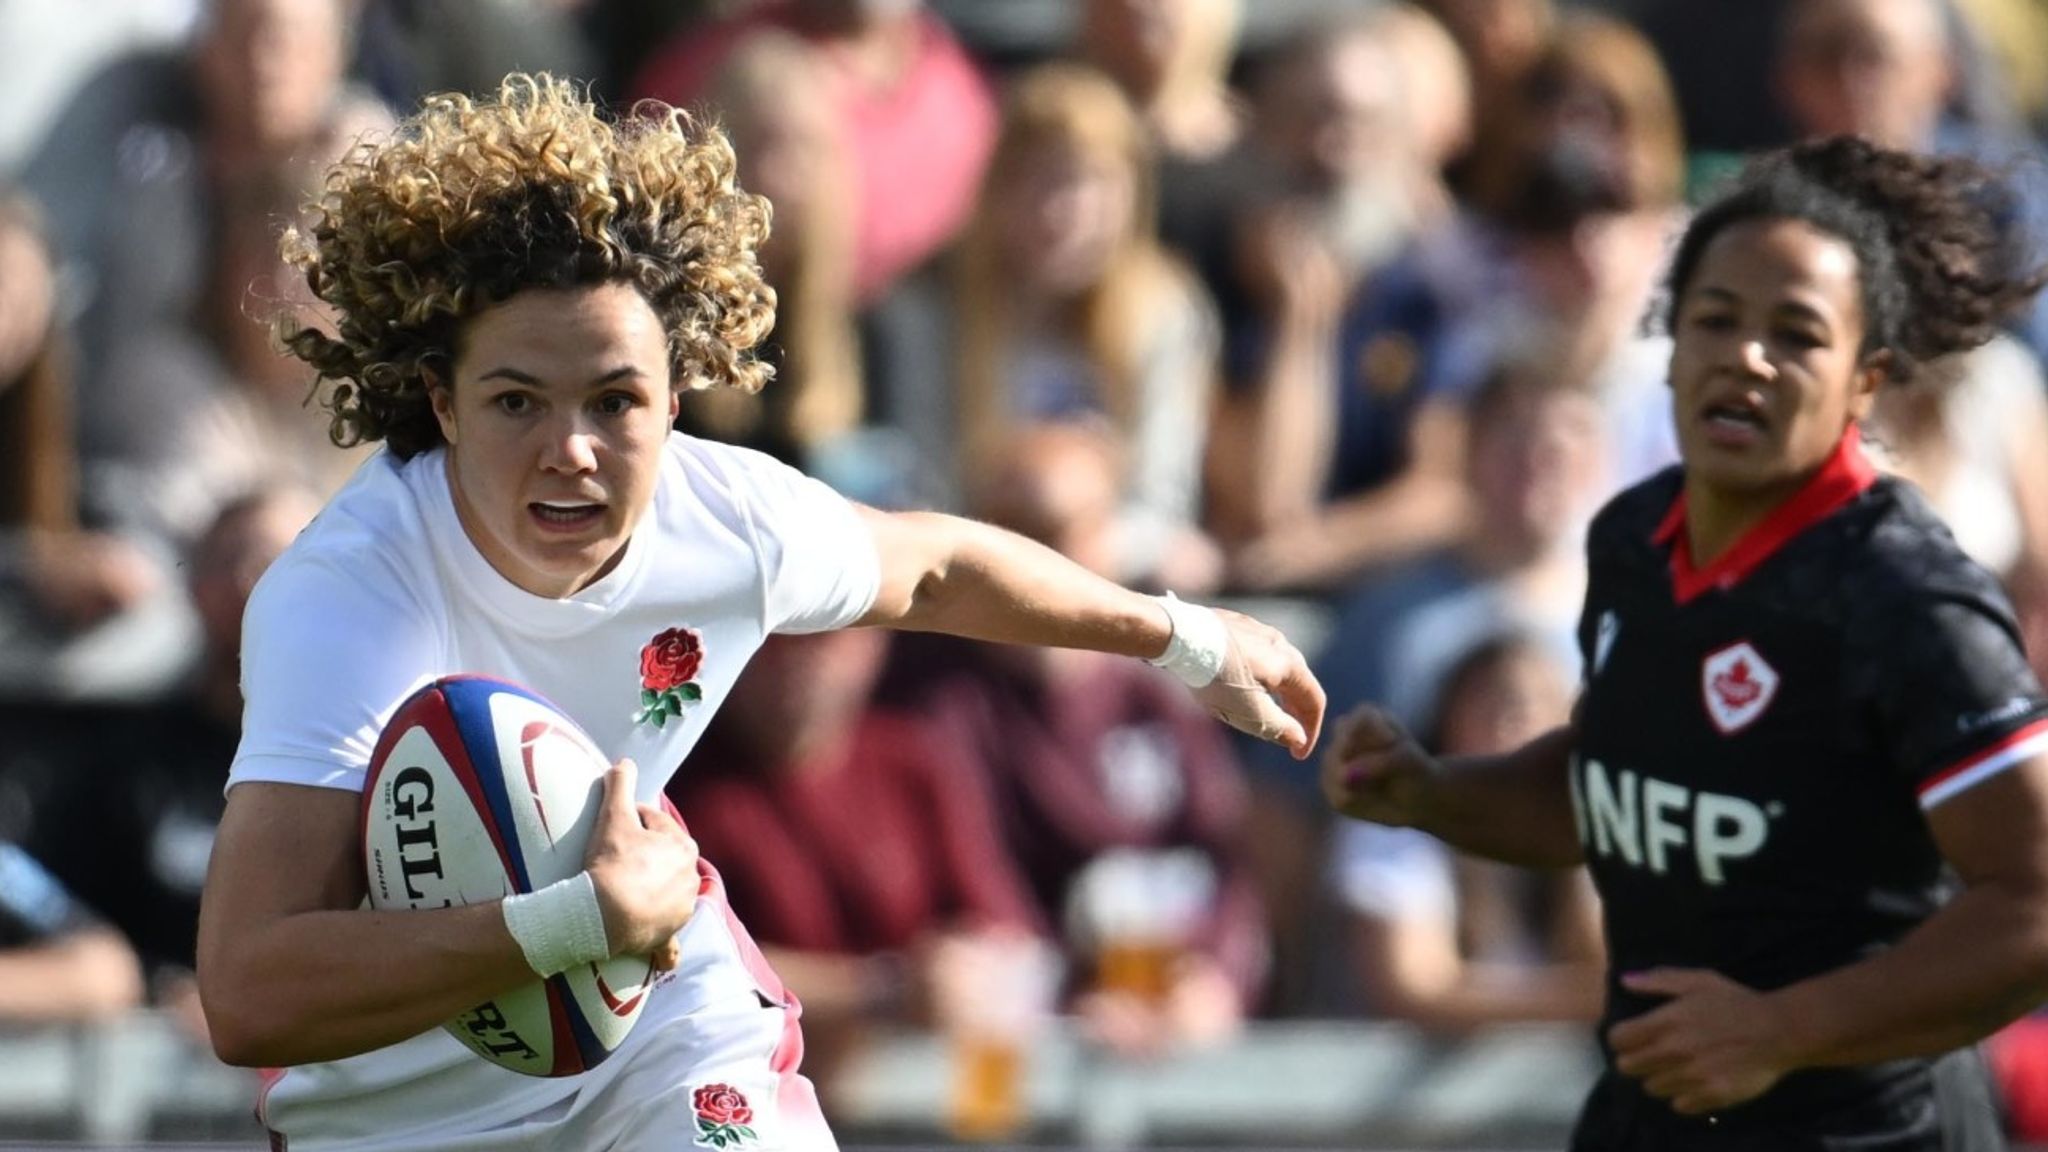 England 50-24 Canada Helena Rowland and Ellie Kildunne score two tries each as Red Roses triumph Rugby Union News Sky Sports